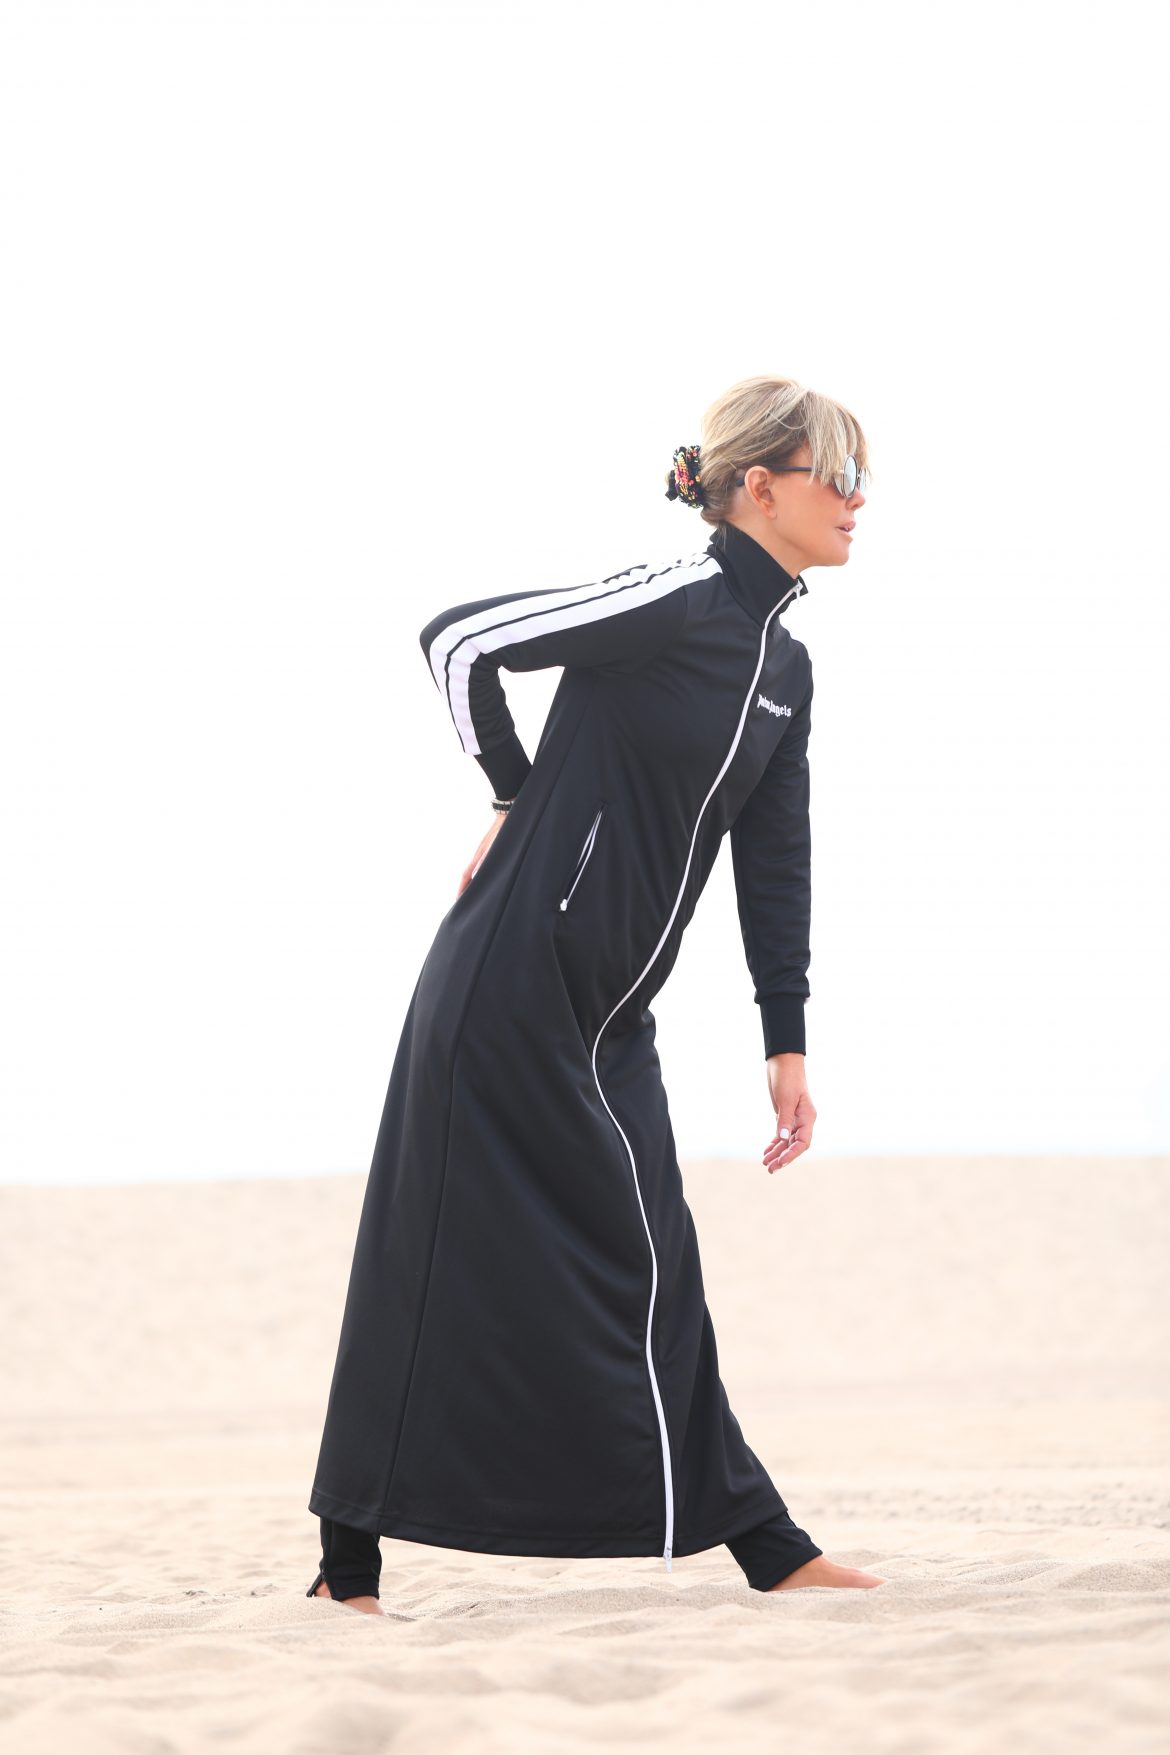 Laura dunn on the beach on a cloudy day wearing a full body black duster